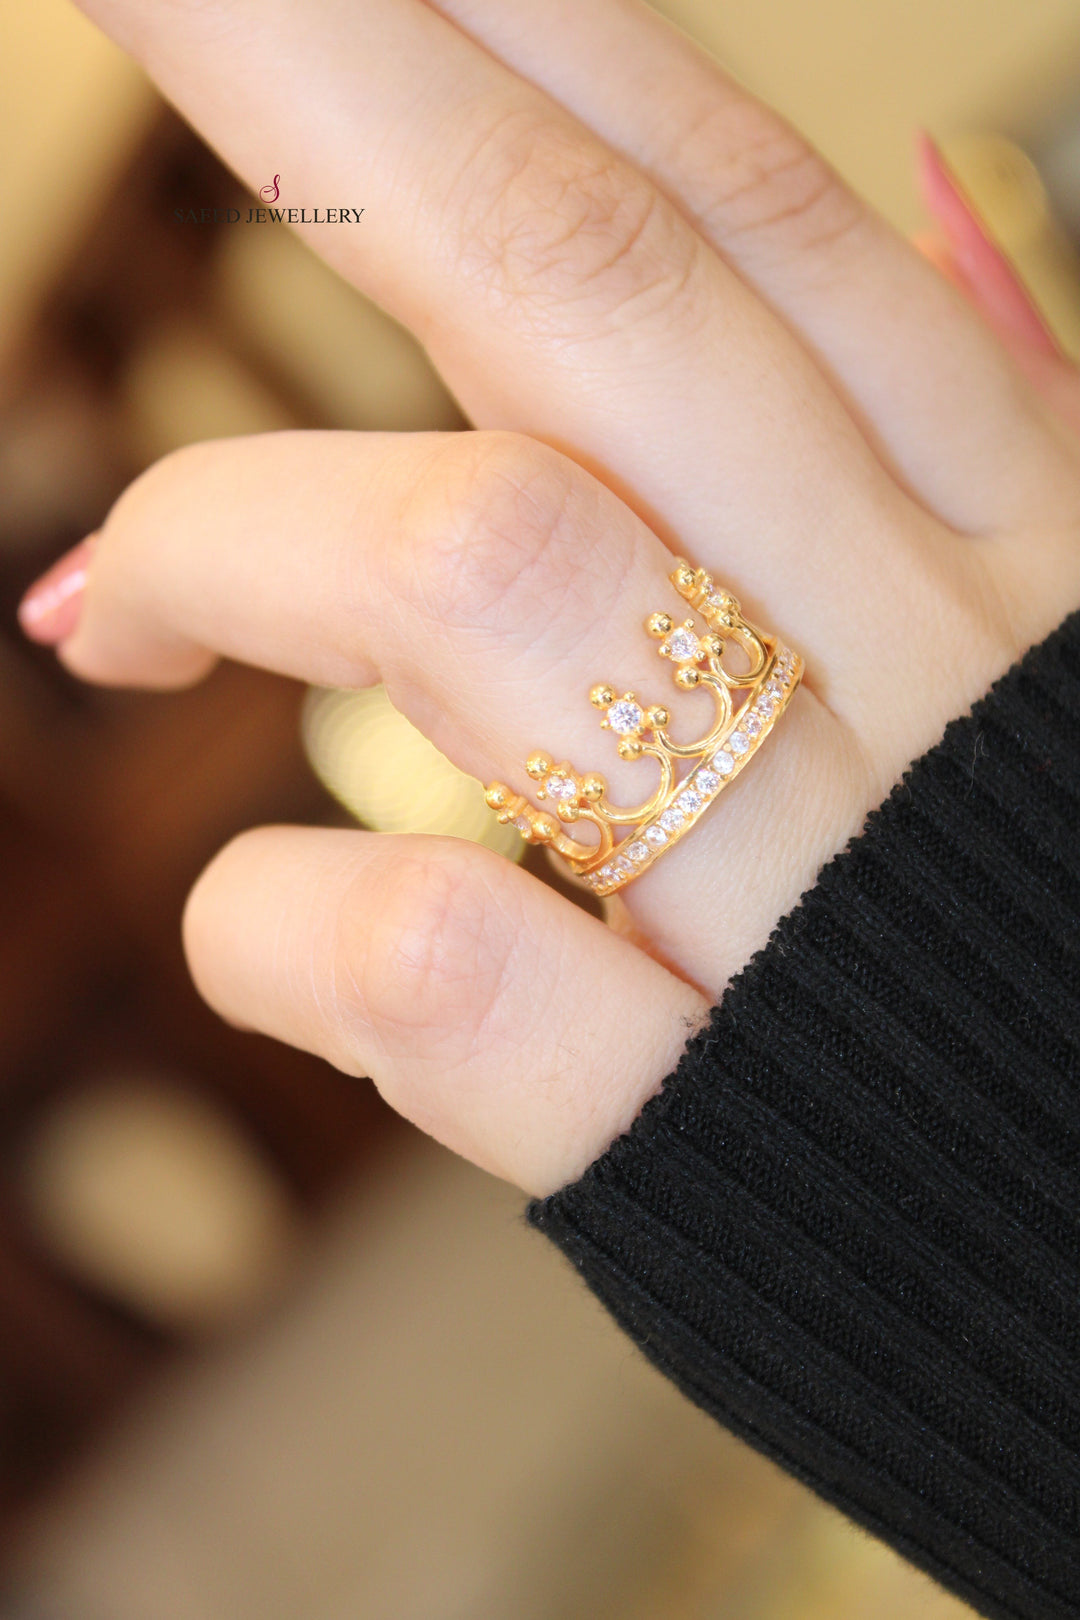 21K Gold Crown Wedding Ring by Saeed Jewelry - Image 14